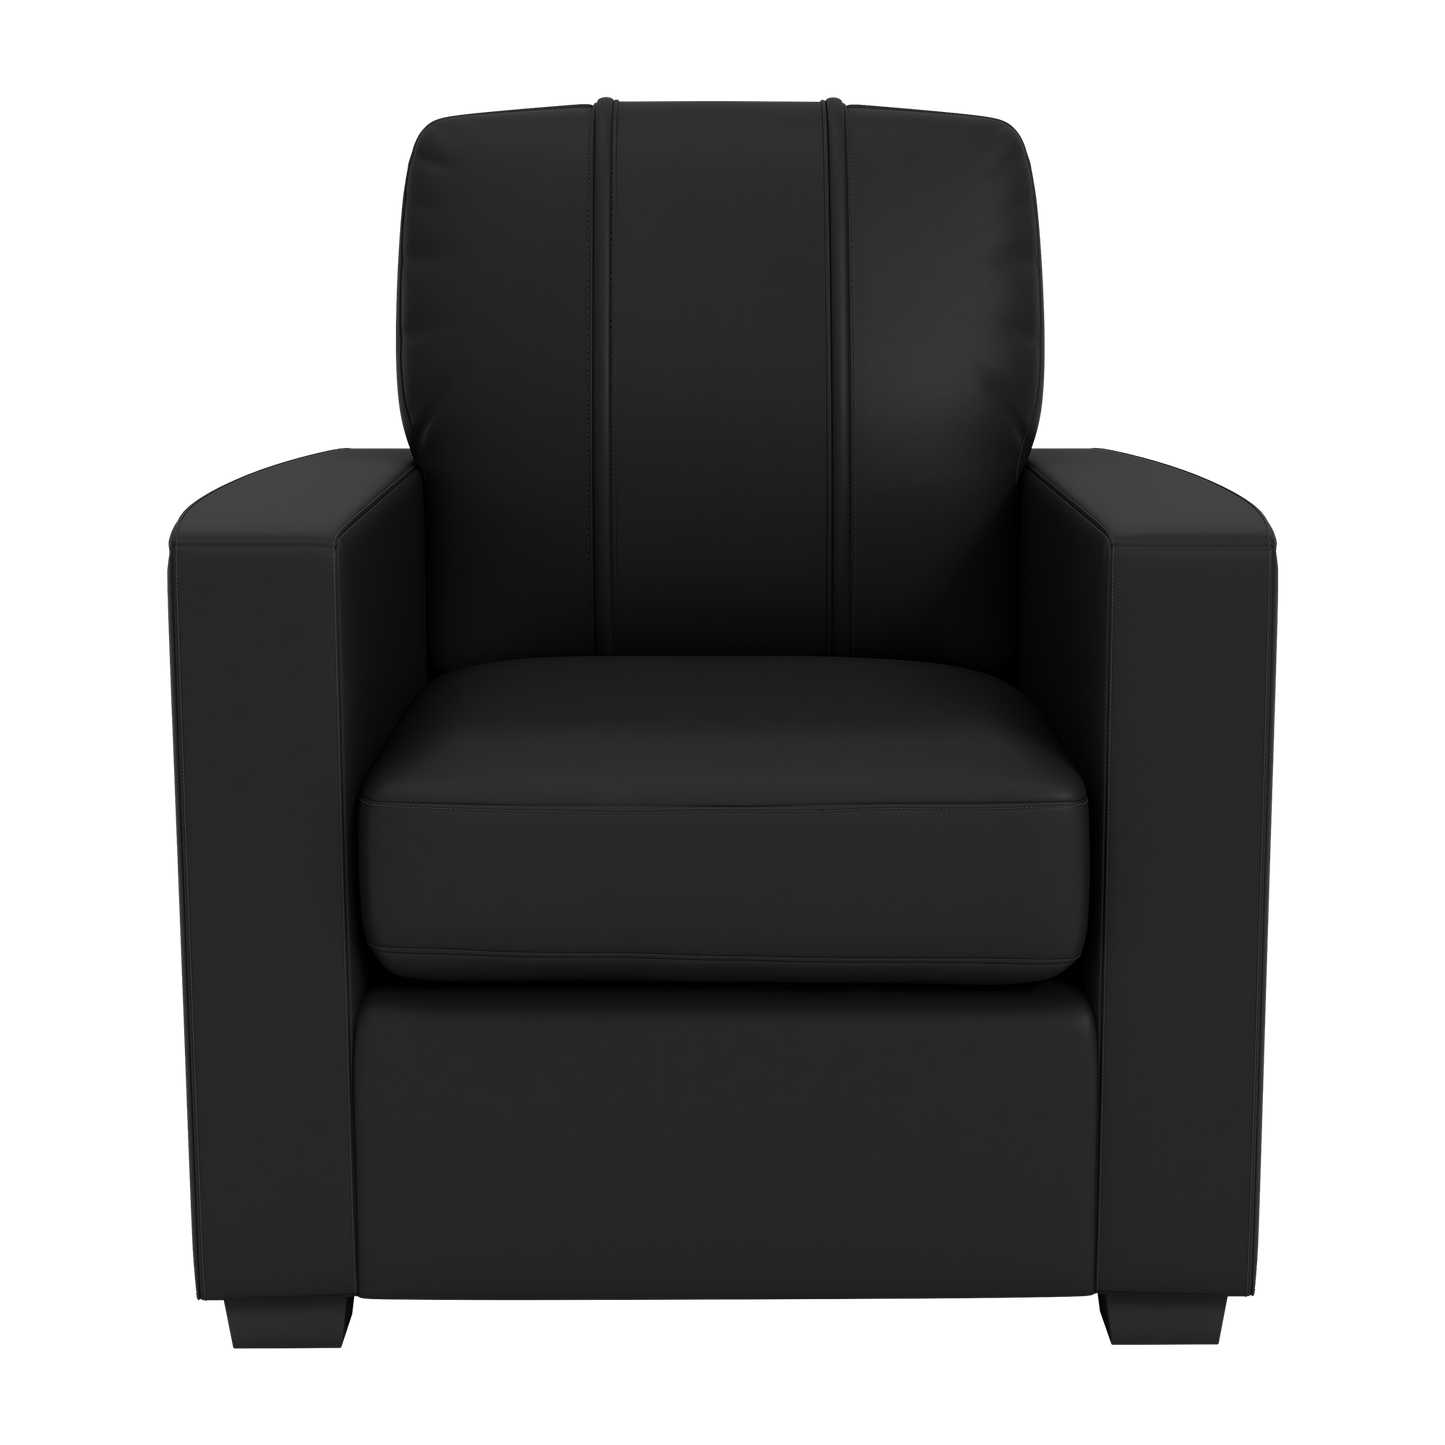 Silver Club Chair with San Diego State Secondary